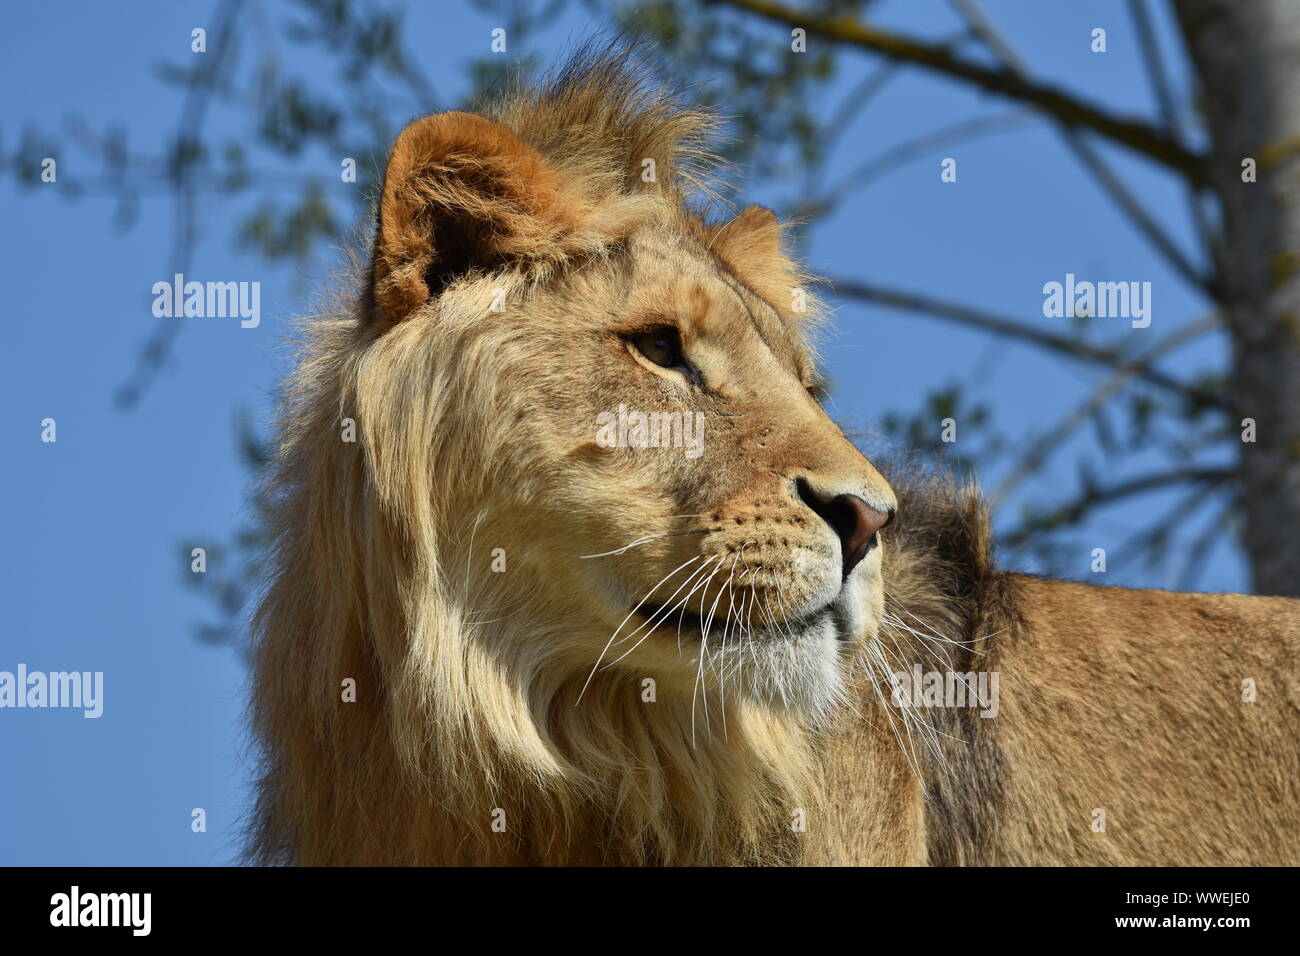 Close up of a young male lion head on blurred blue sky background. Horizontal view Stock Photo